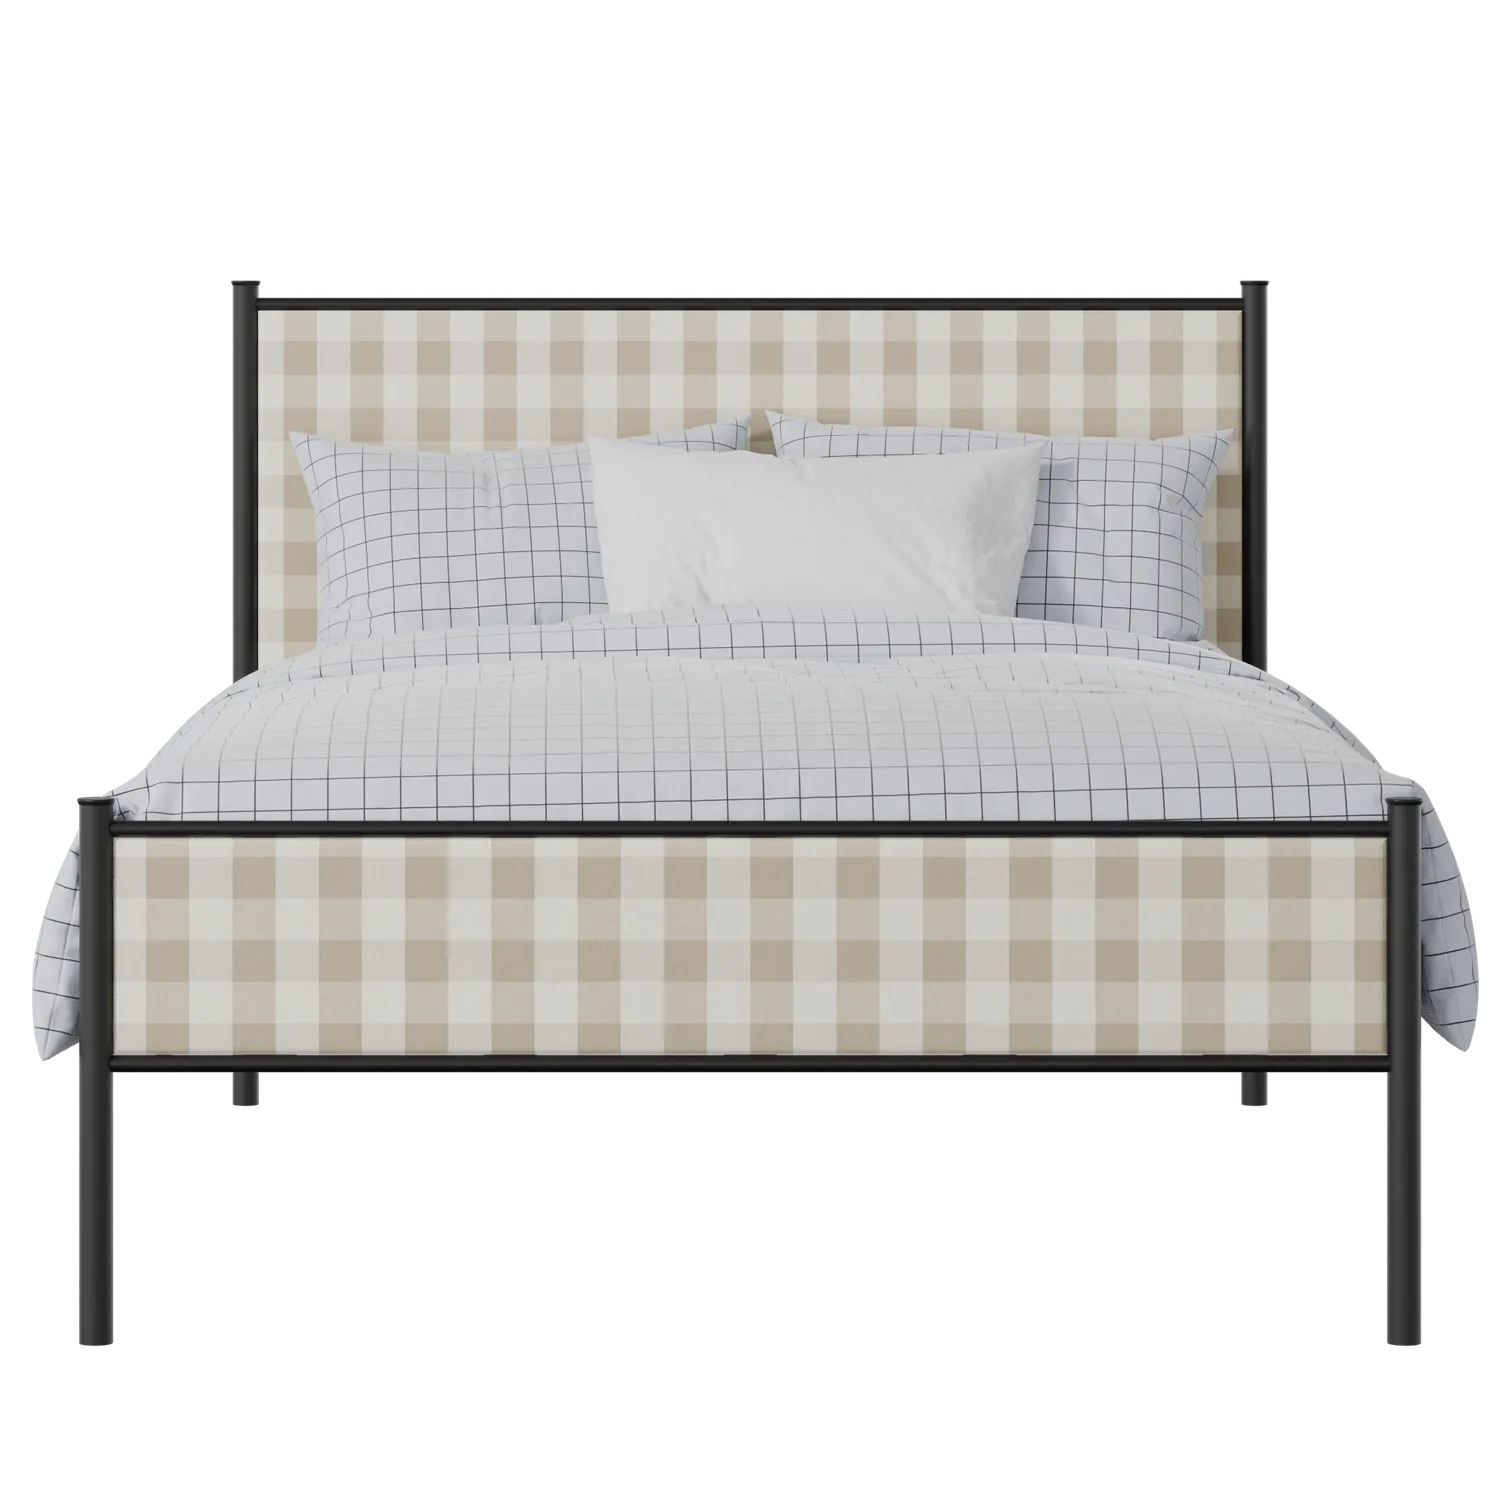 Brest Slim iron/metal upholstered bed in black with Romo Kemble Putty fabric